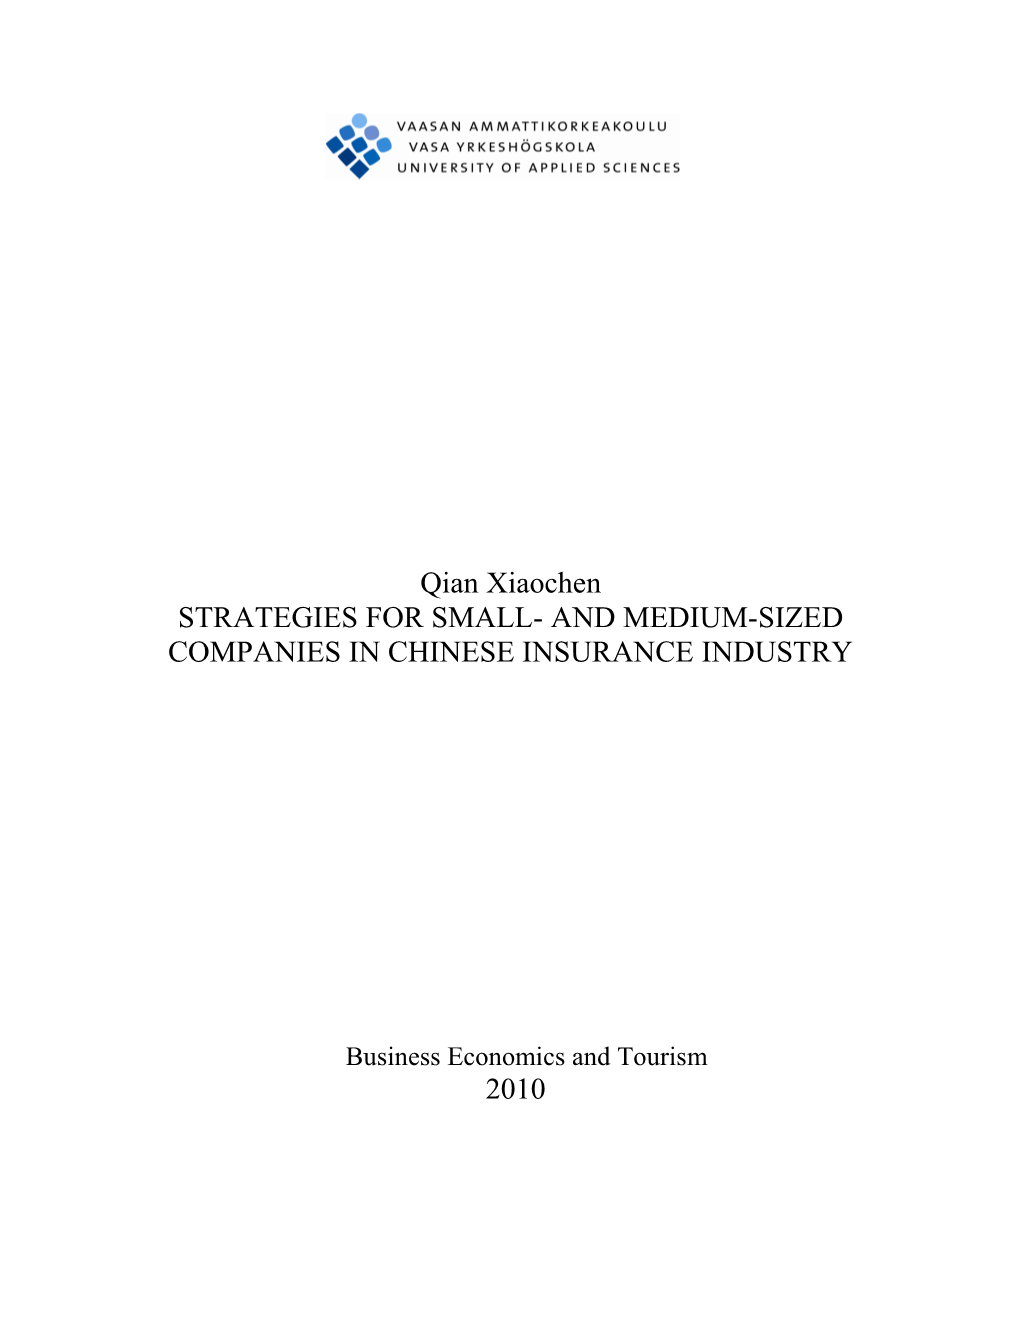 Qian Xiaochen STRATEGIES for SMALL- and MEDIUM-SIZED COMPANIES in CHINESE INSURANCE INDUSTRY